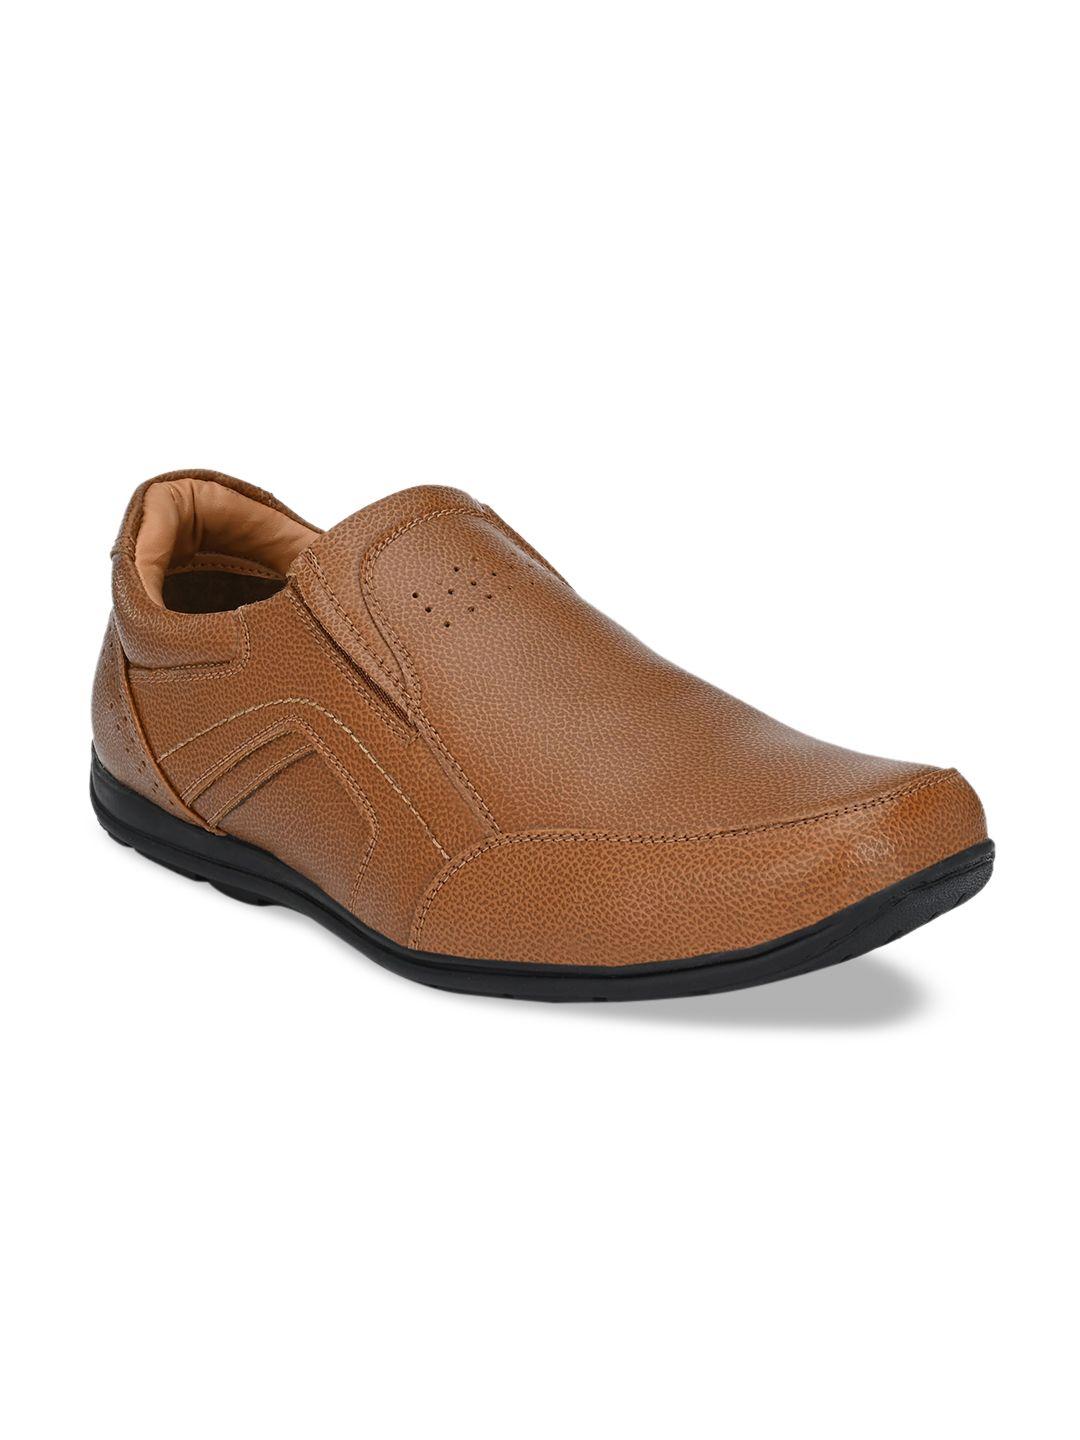 provogue-men-tan-brown-synthetic-leather-textured-loafers